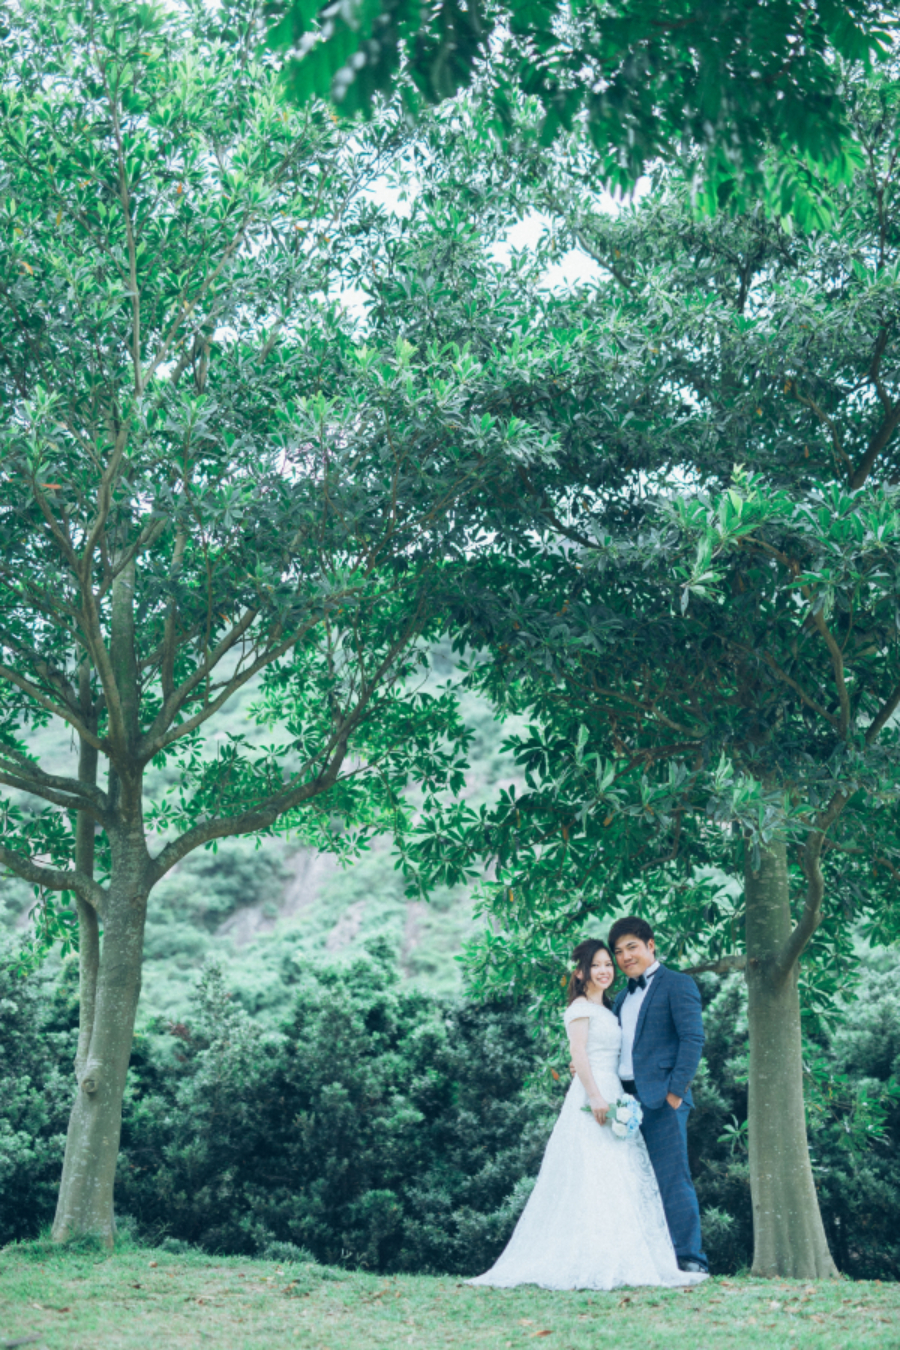 Hong Kong Outdoor Pre-Wedding Photoshoot At Disney Lake, Stanley, Central Pier by Felix on OneThreeOneFour 8